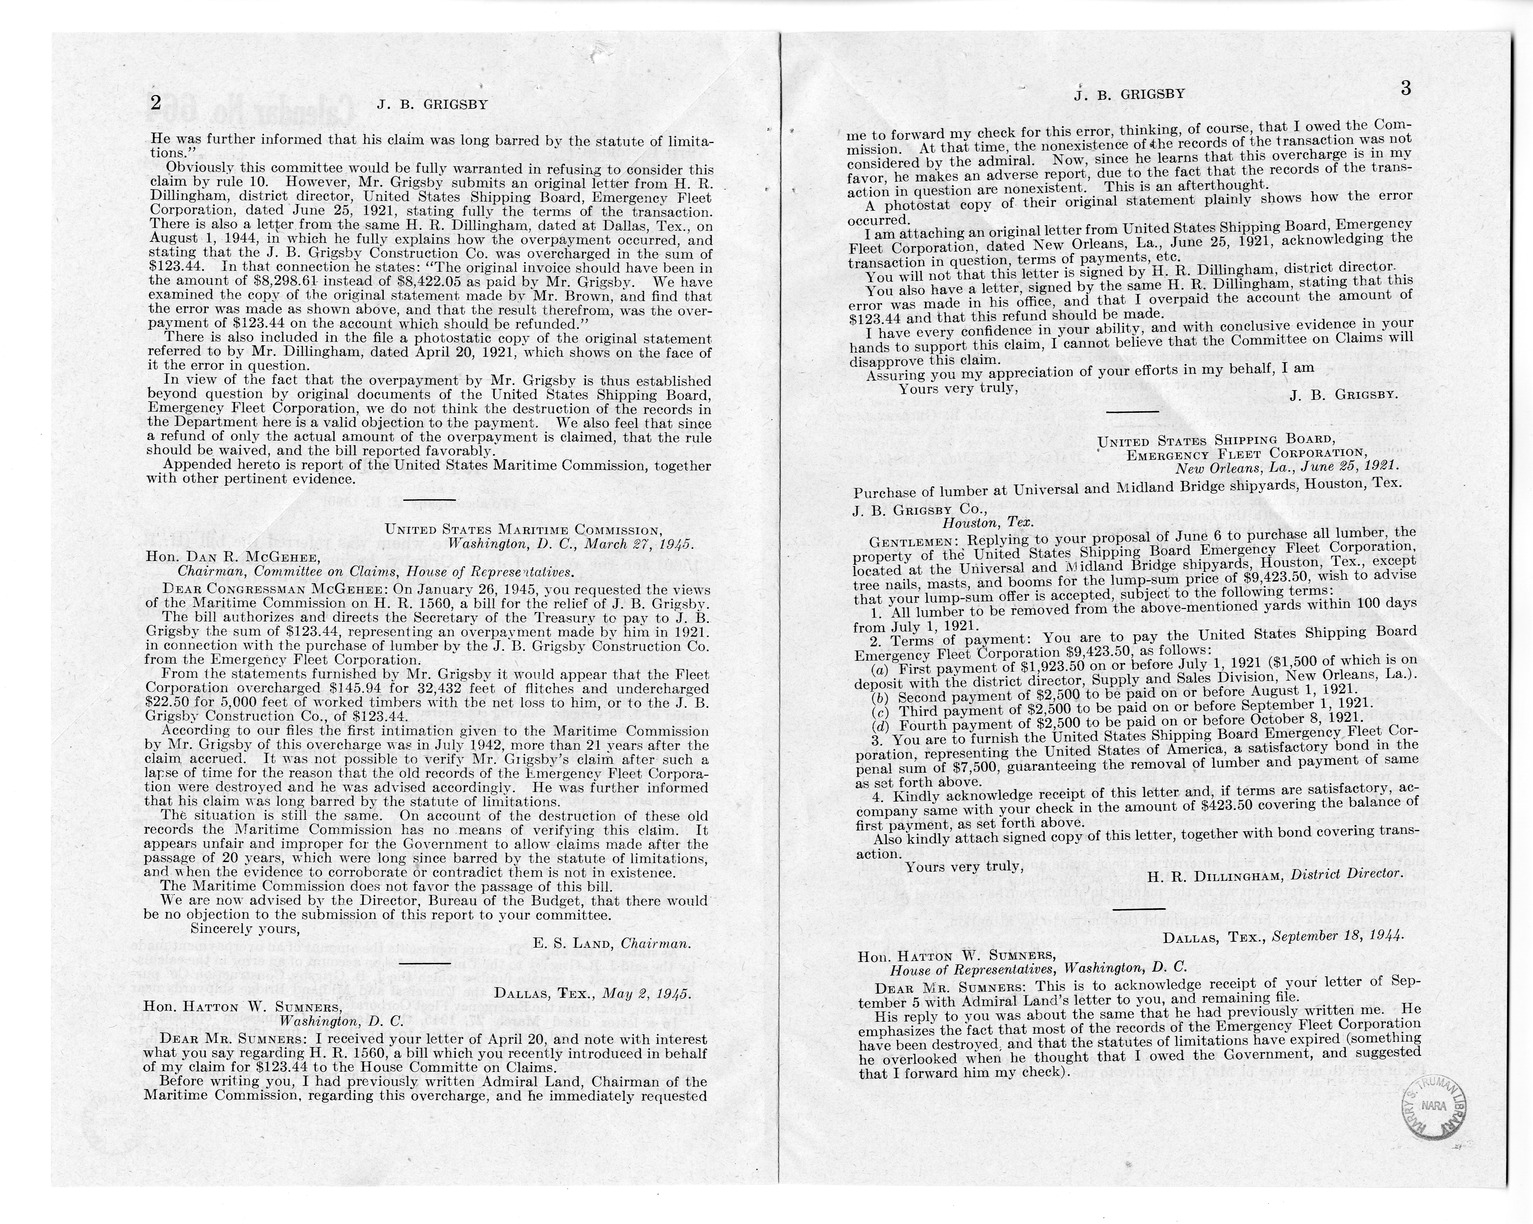 Memorandum from Frederick J. Bailey to M. C. Latta, H.R. 1560, For the Relief of J.B. Grigsby, with Attachments